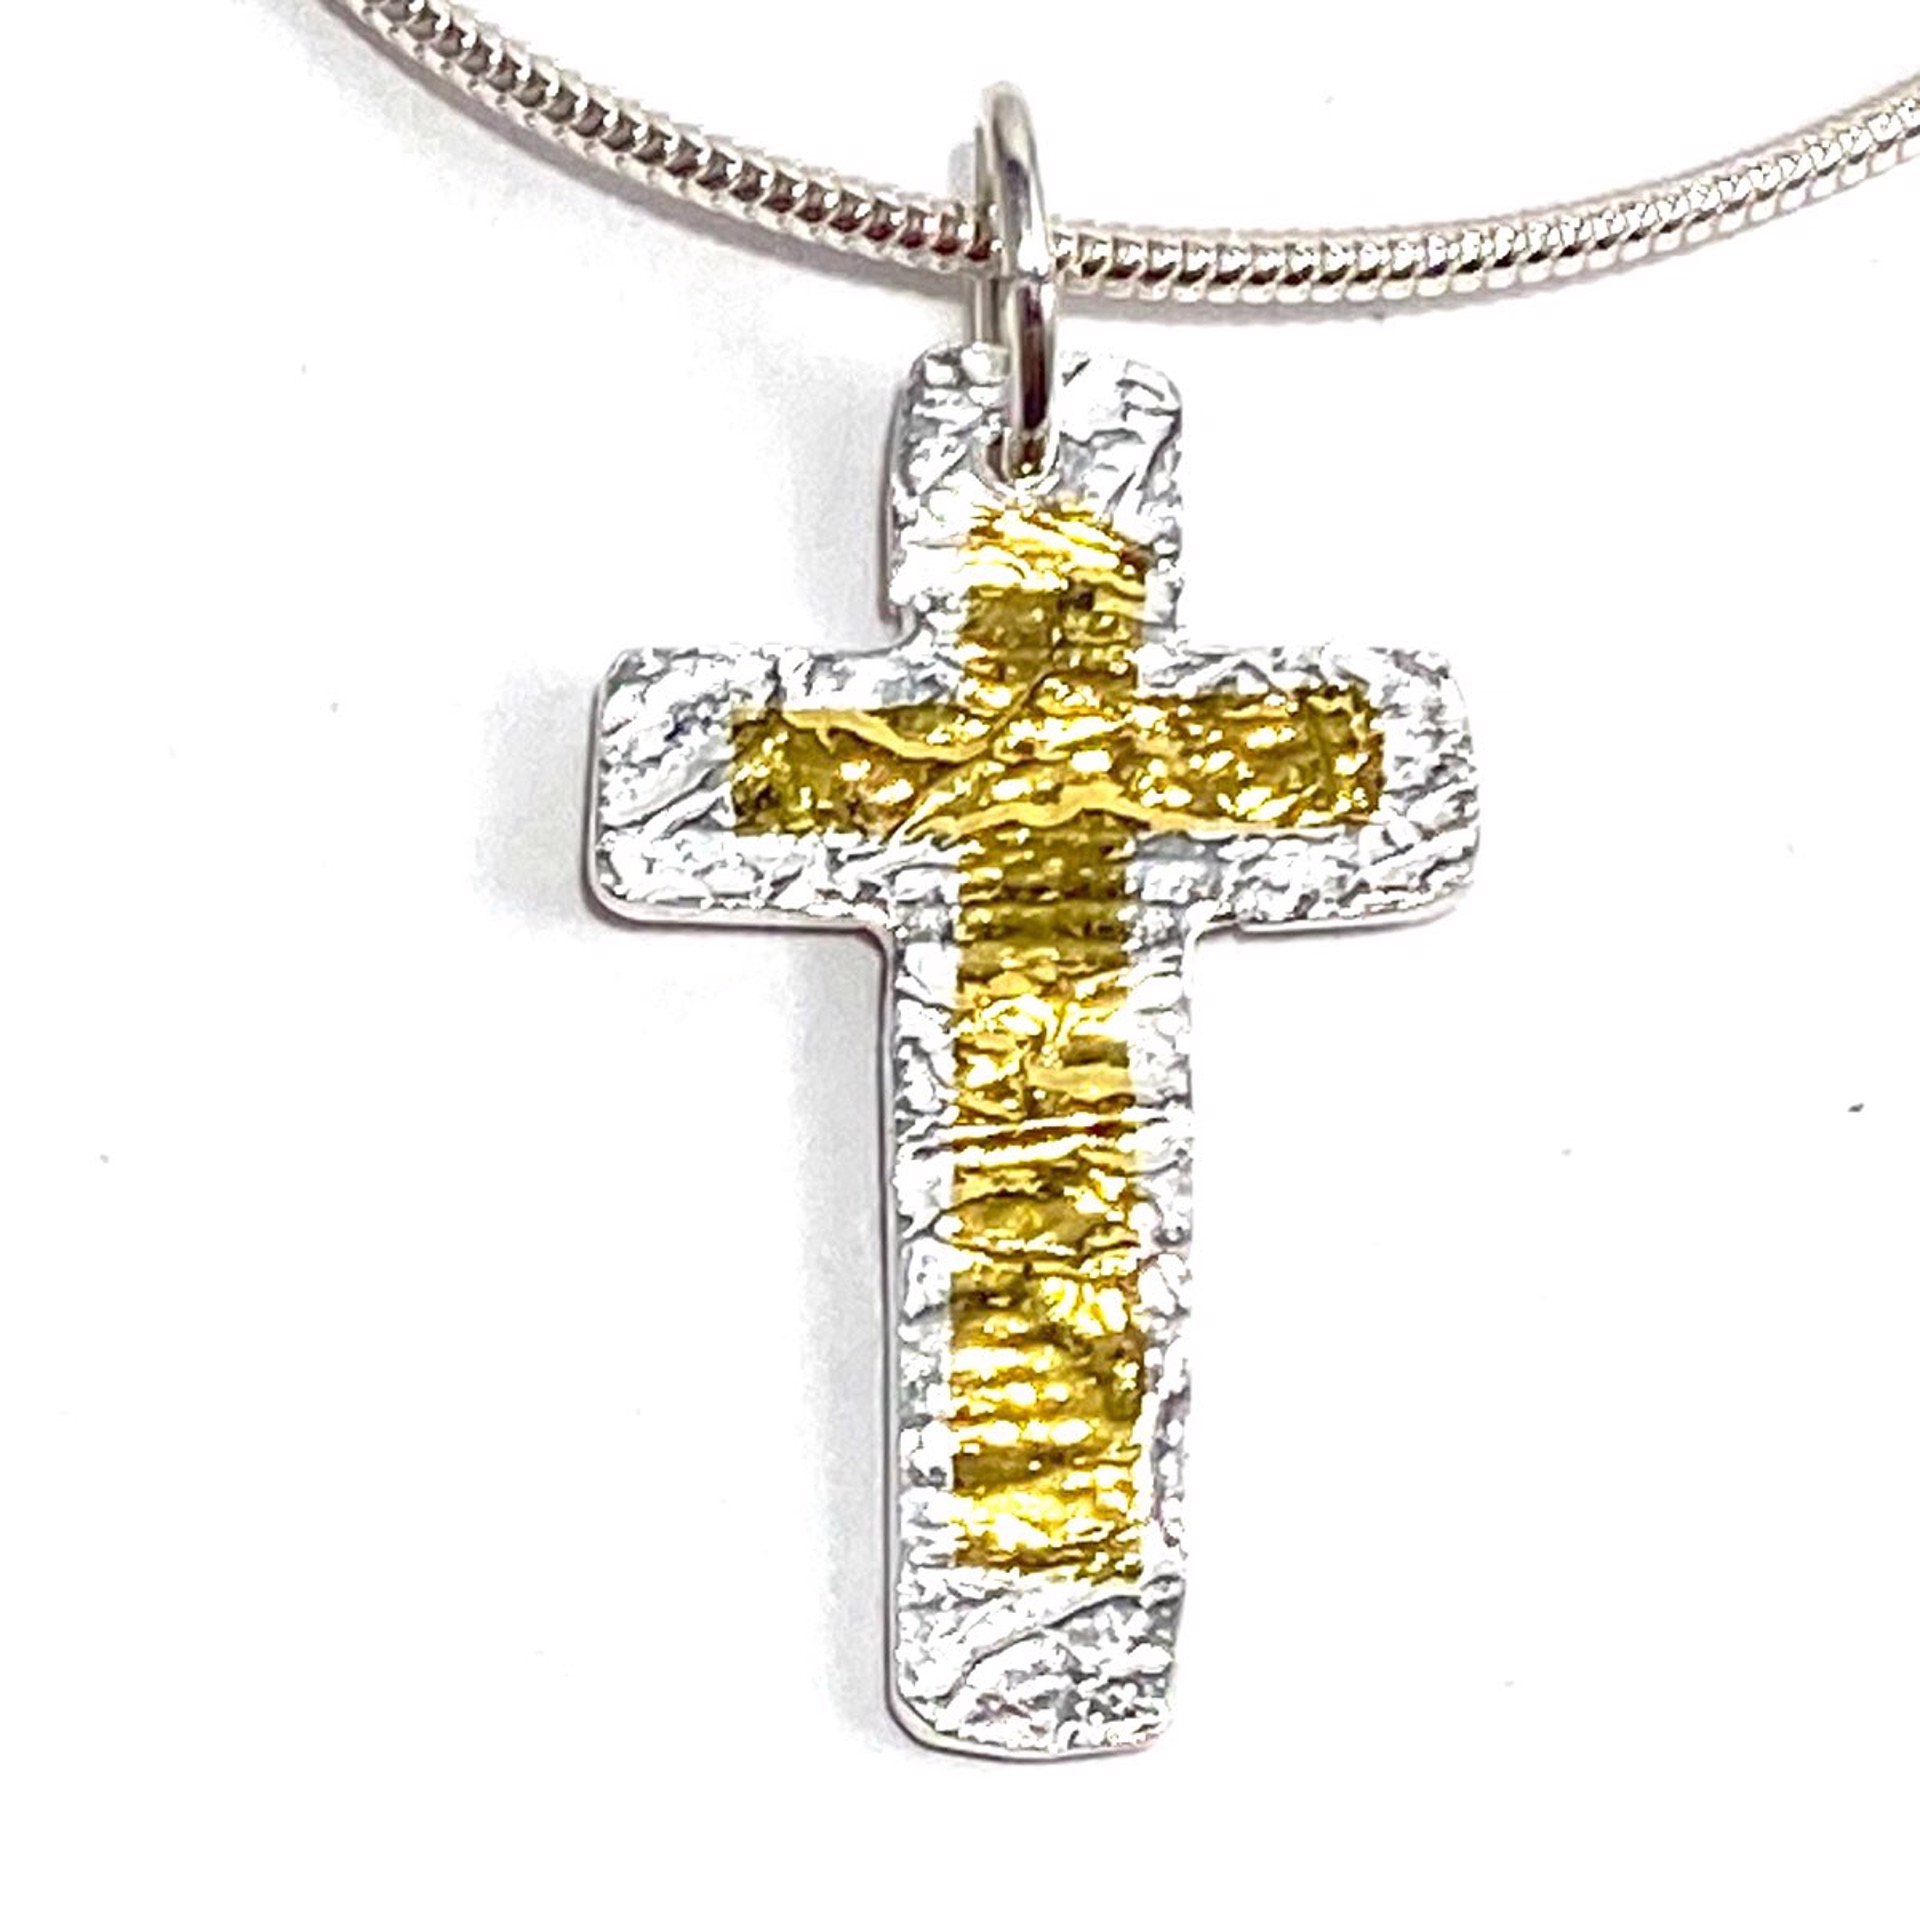 KH22-71 Keum-Boo Fine Silver and Gold Reversible Cross Necklace by Karen Hakim